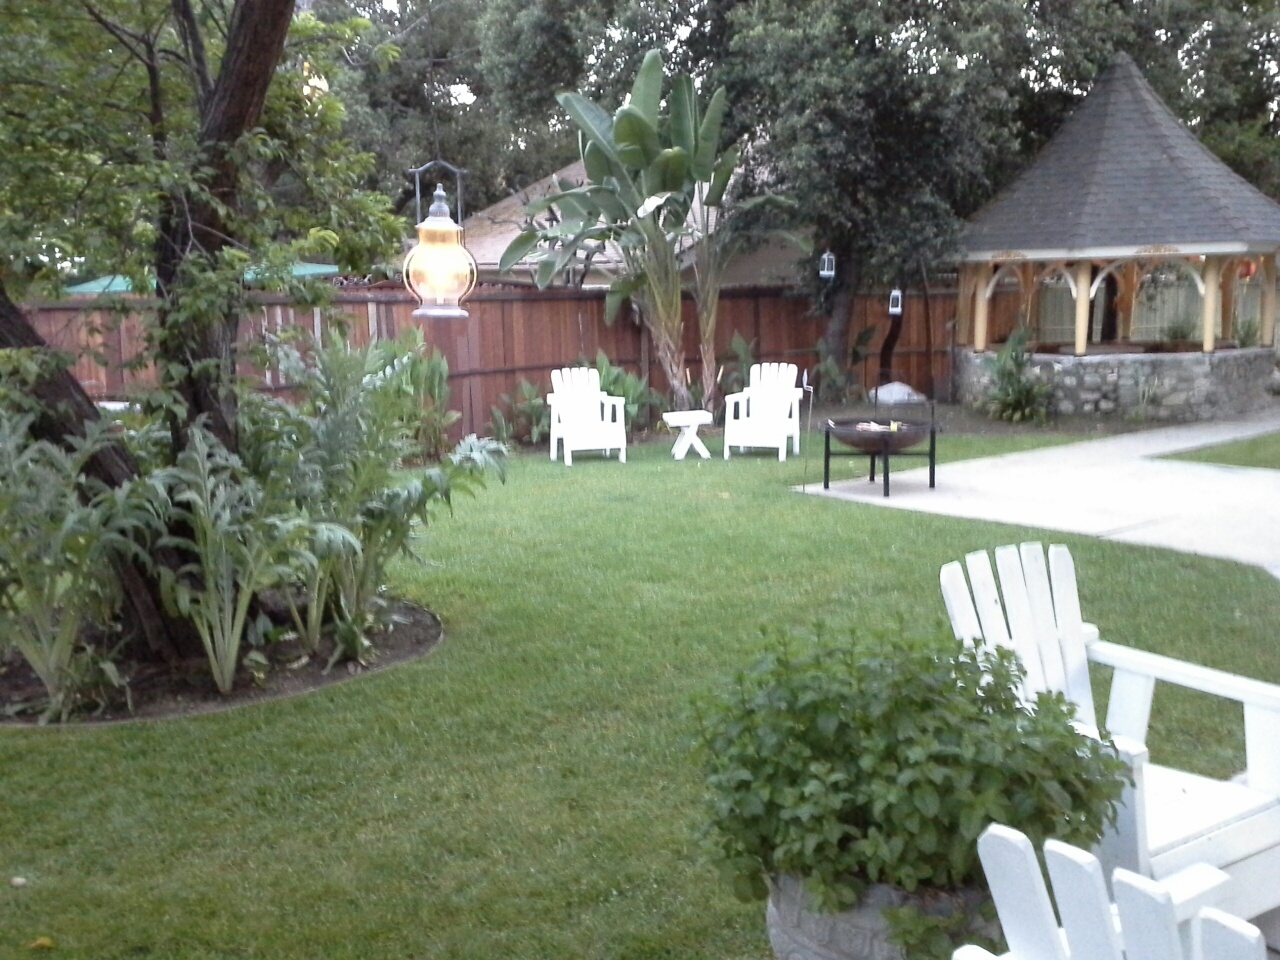 Back Yard of the Ernest Wood House